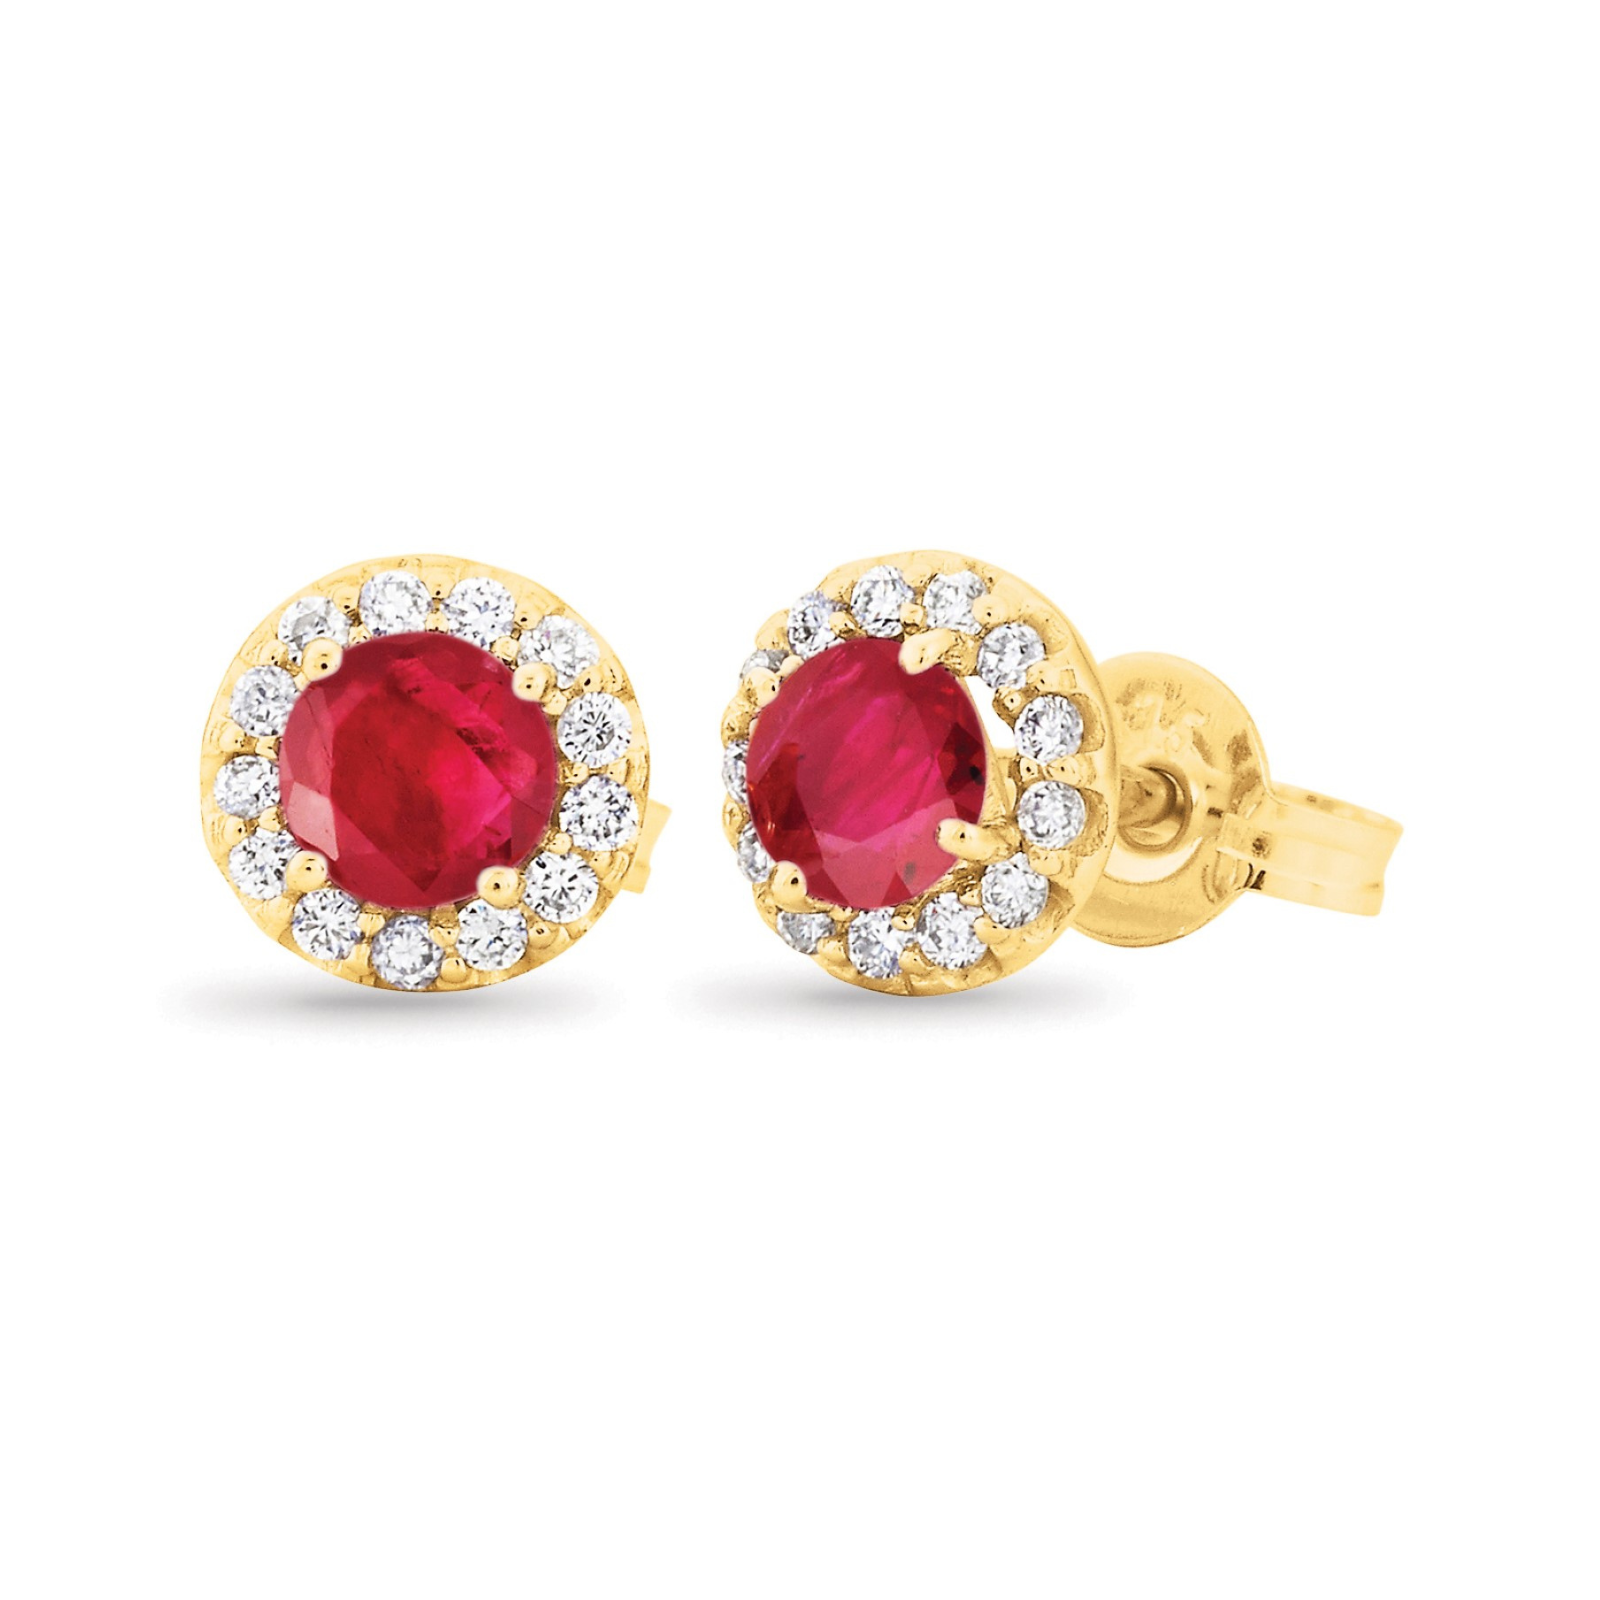 9ct Yellow Gold Ruby Stud Earrings With Diamond Halo